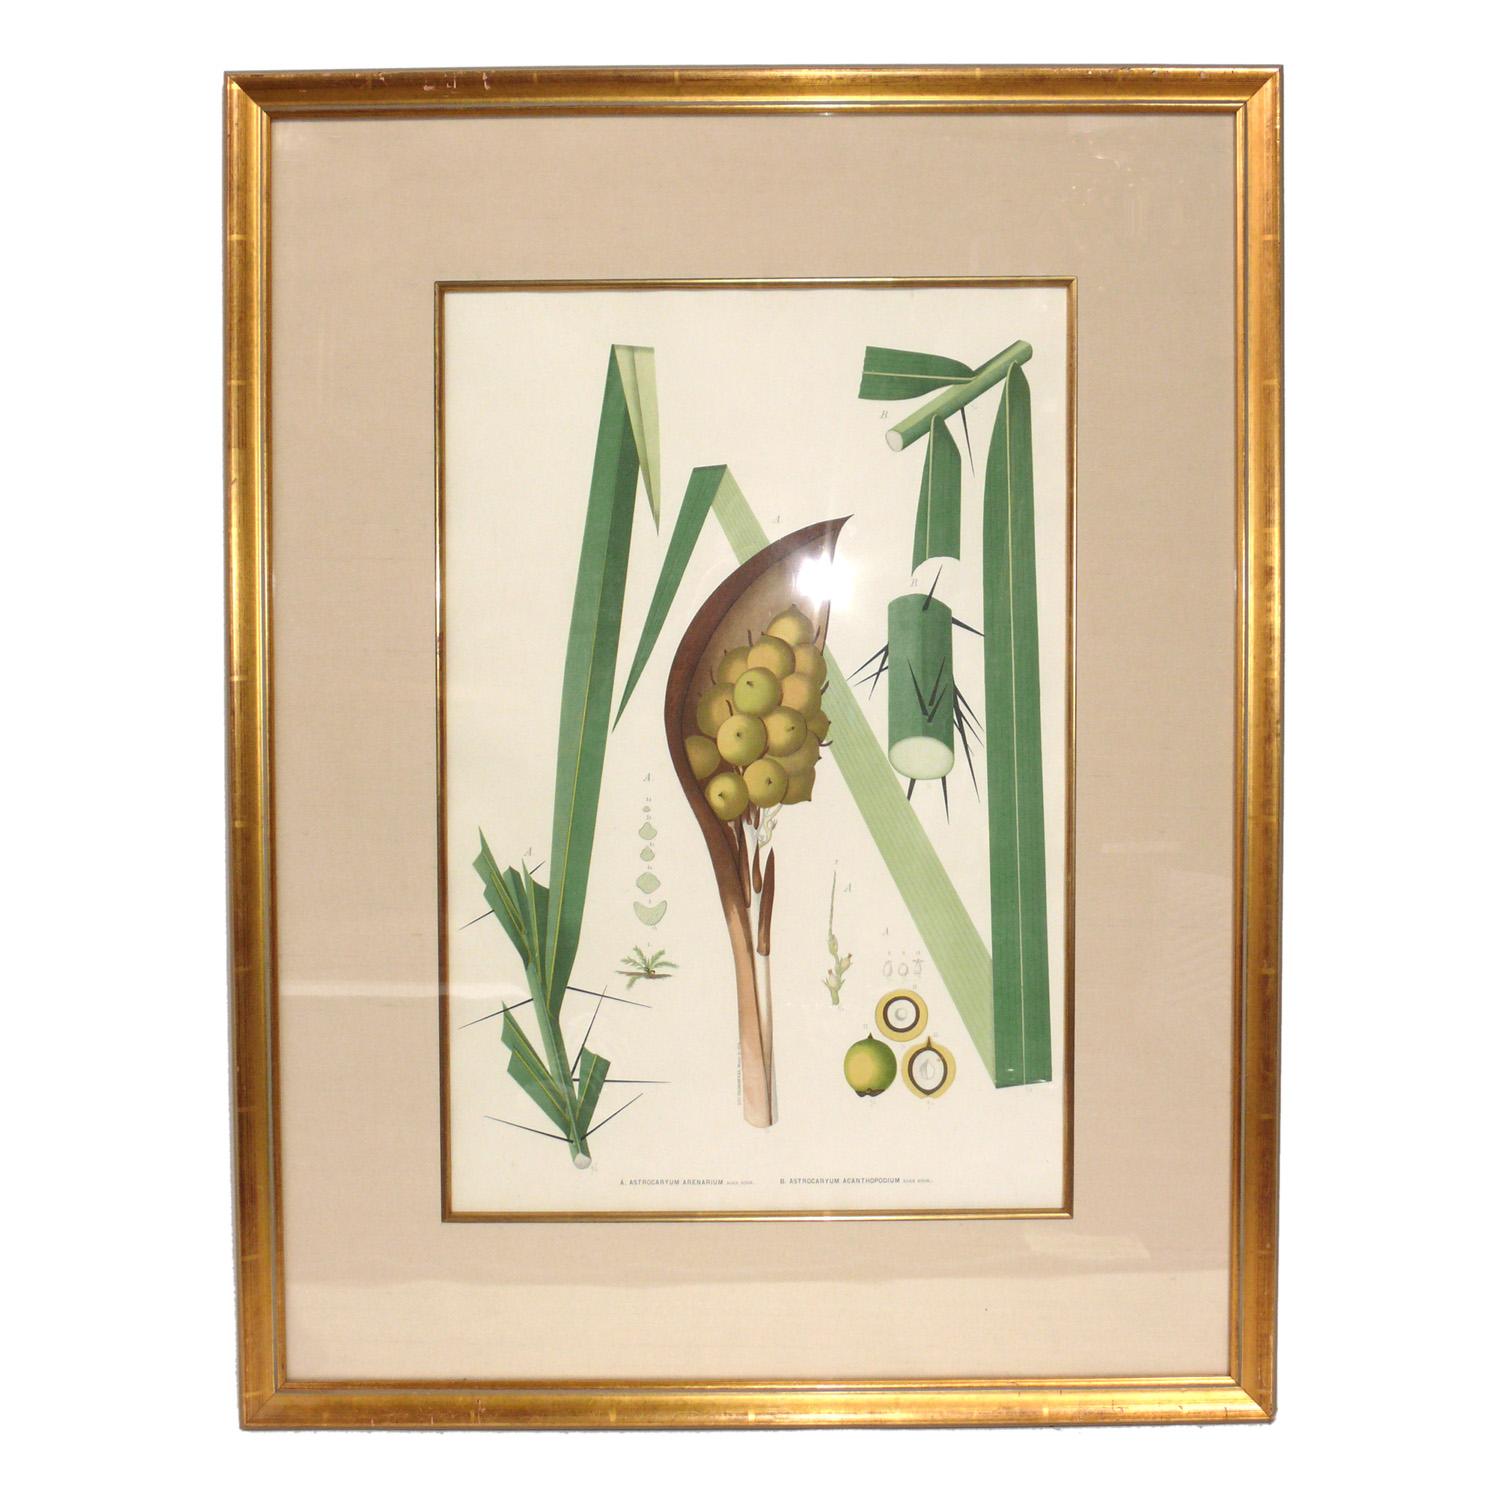 Aesthetic Movement Group of 19th Century Botanical Palm Species Lithographs For Sale